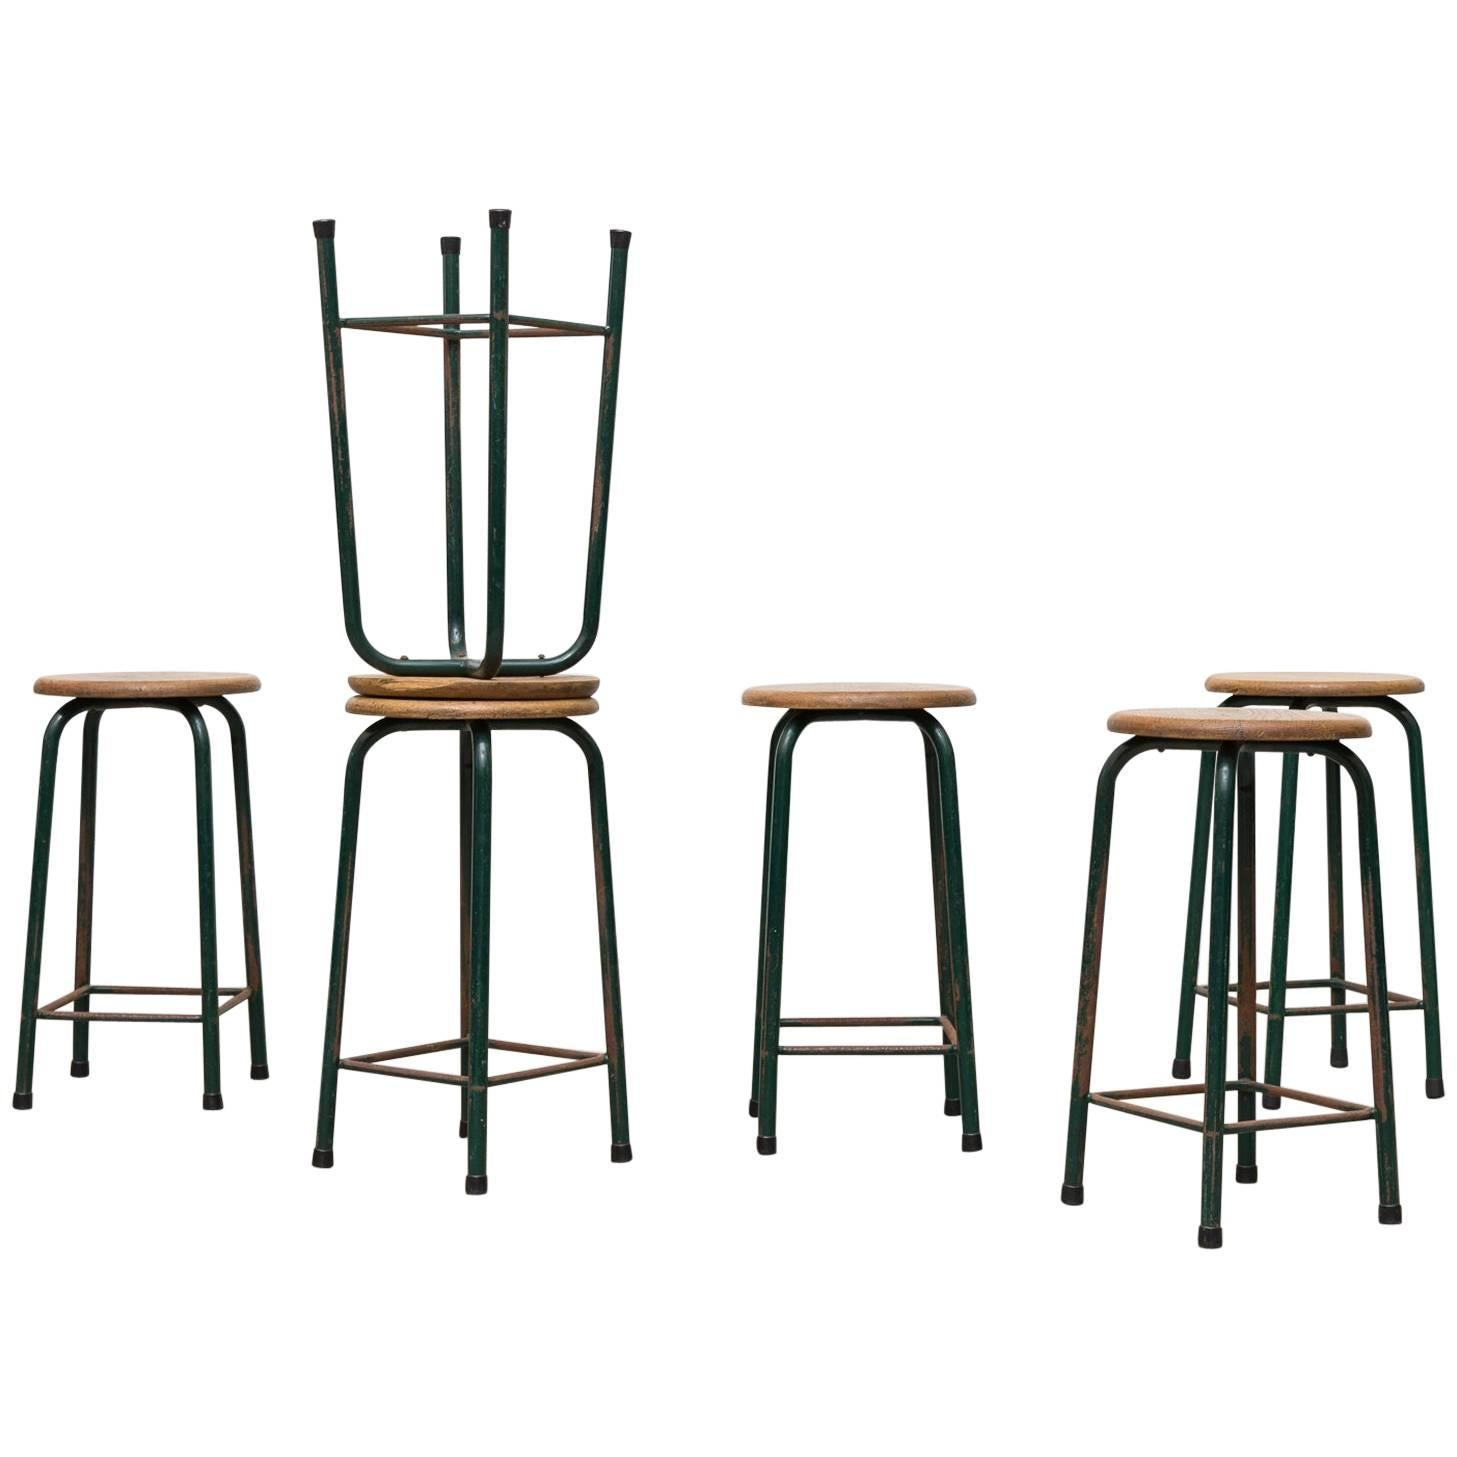 Set of Six Industrial Science Lab Stools